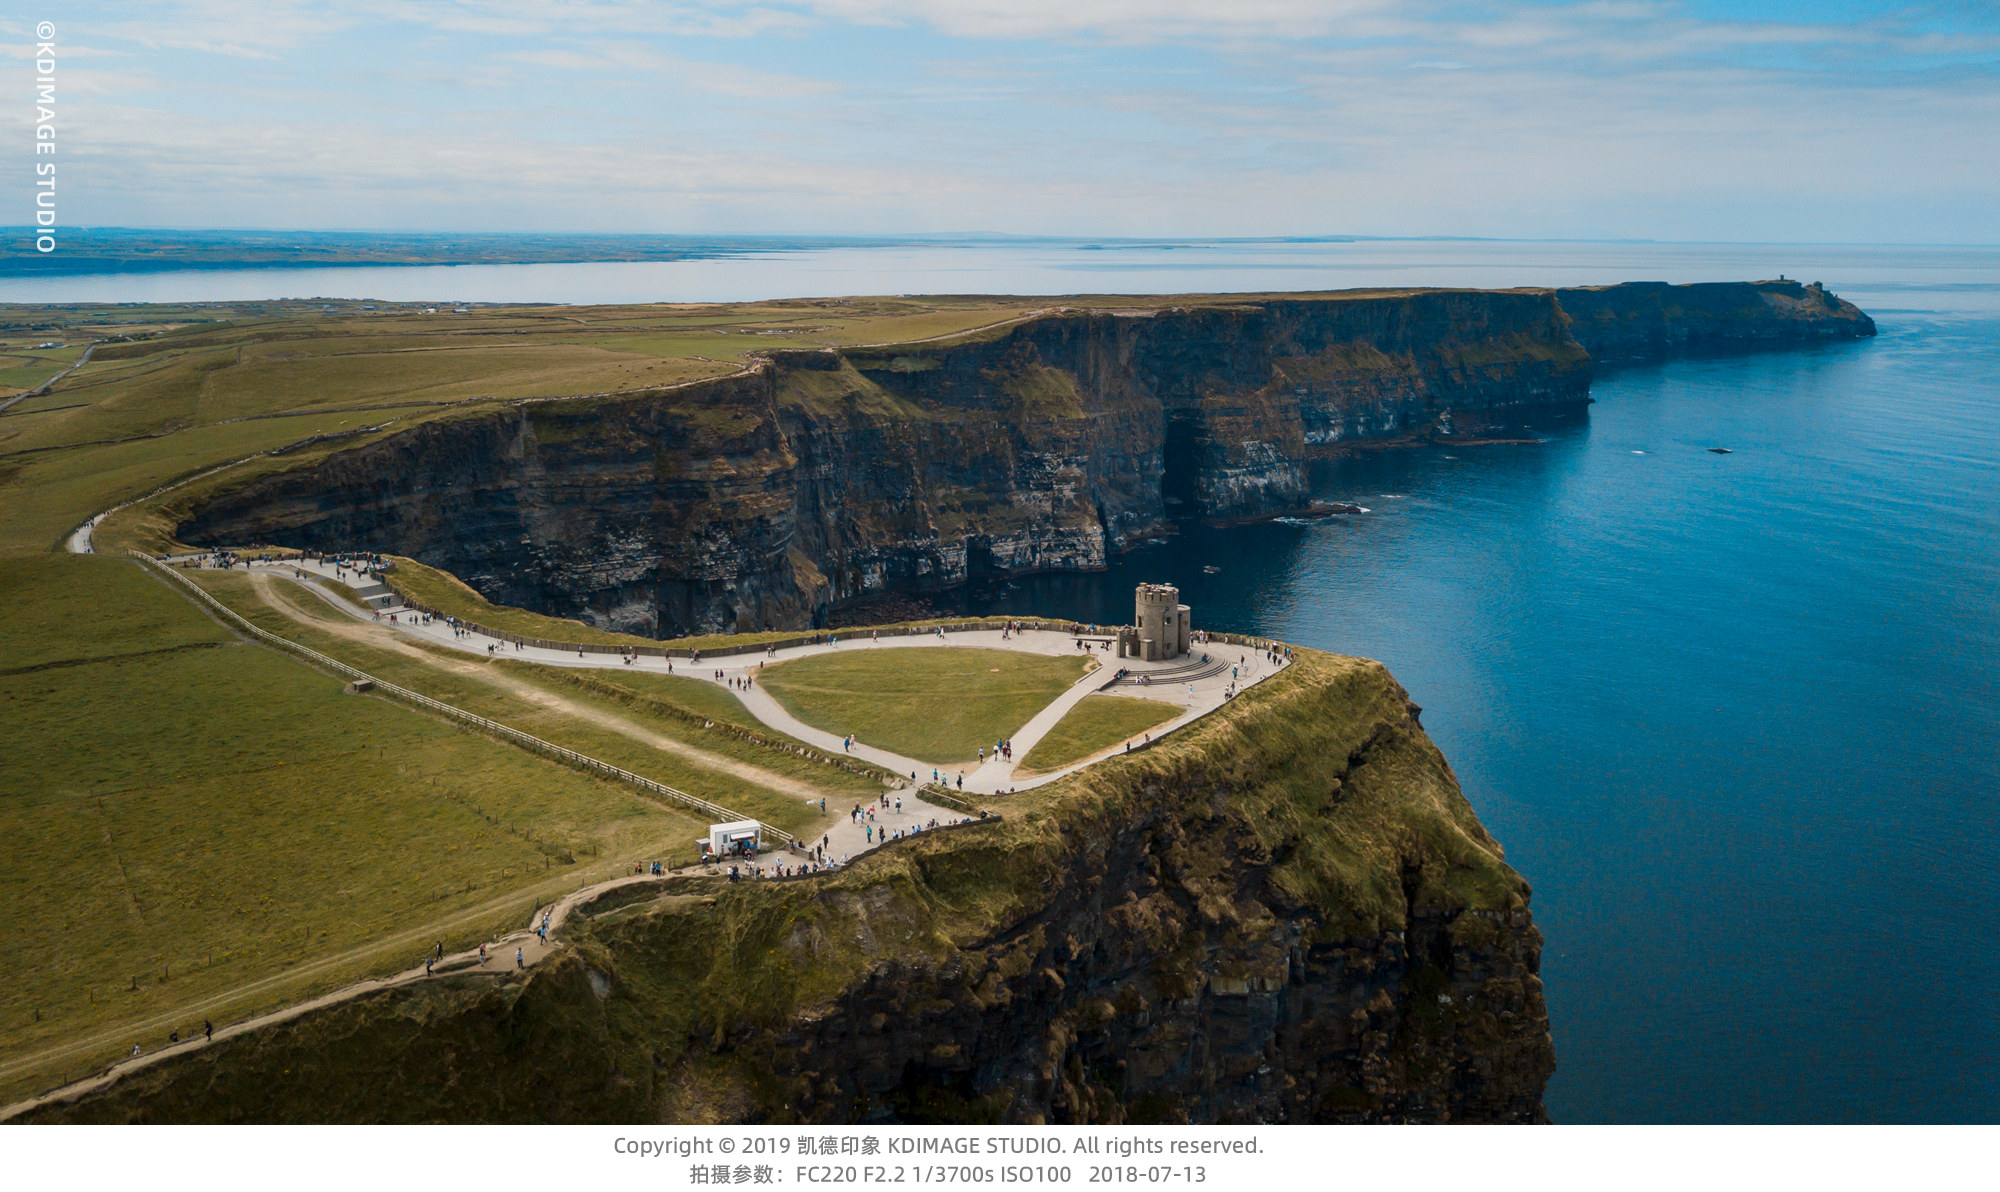 2022The Cliffs of Moher New Visiter Experience游玩攻略,莫赫悬崖（CliffsofMoher）是...【去哪儿攻略】